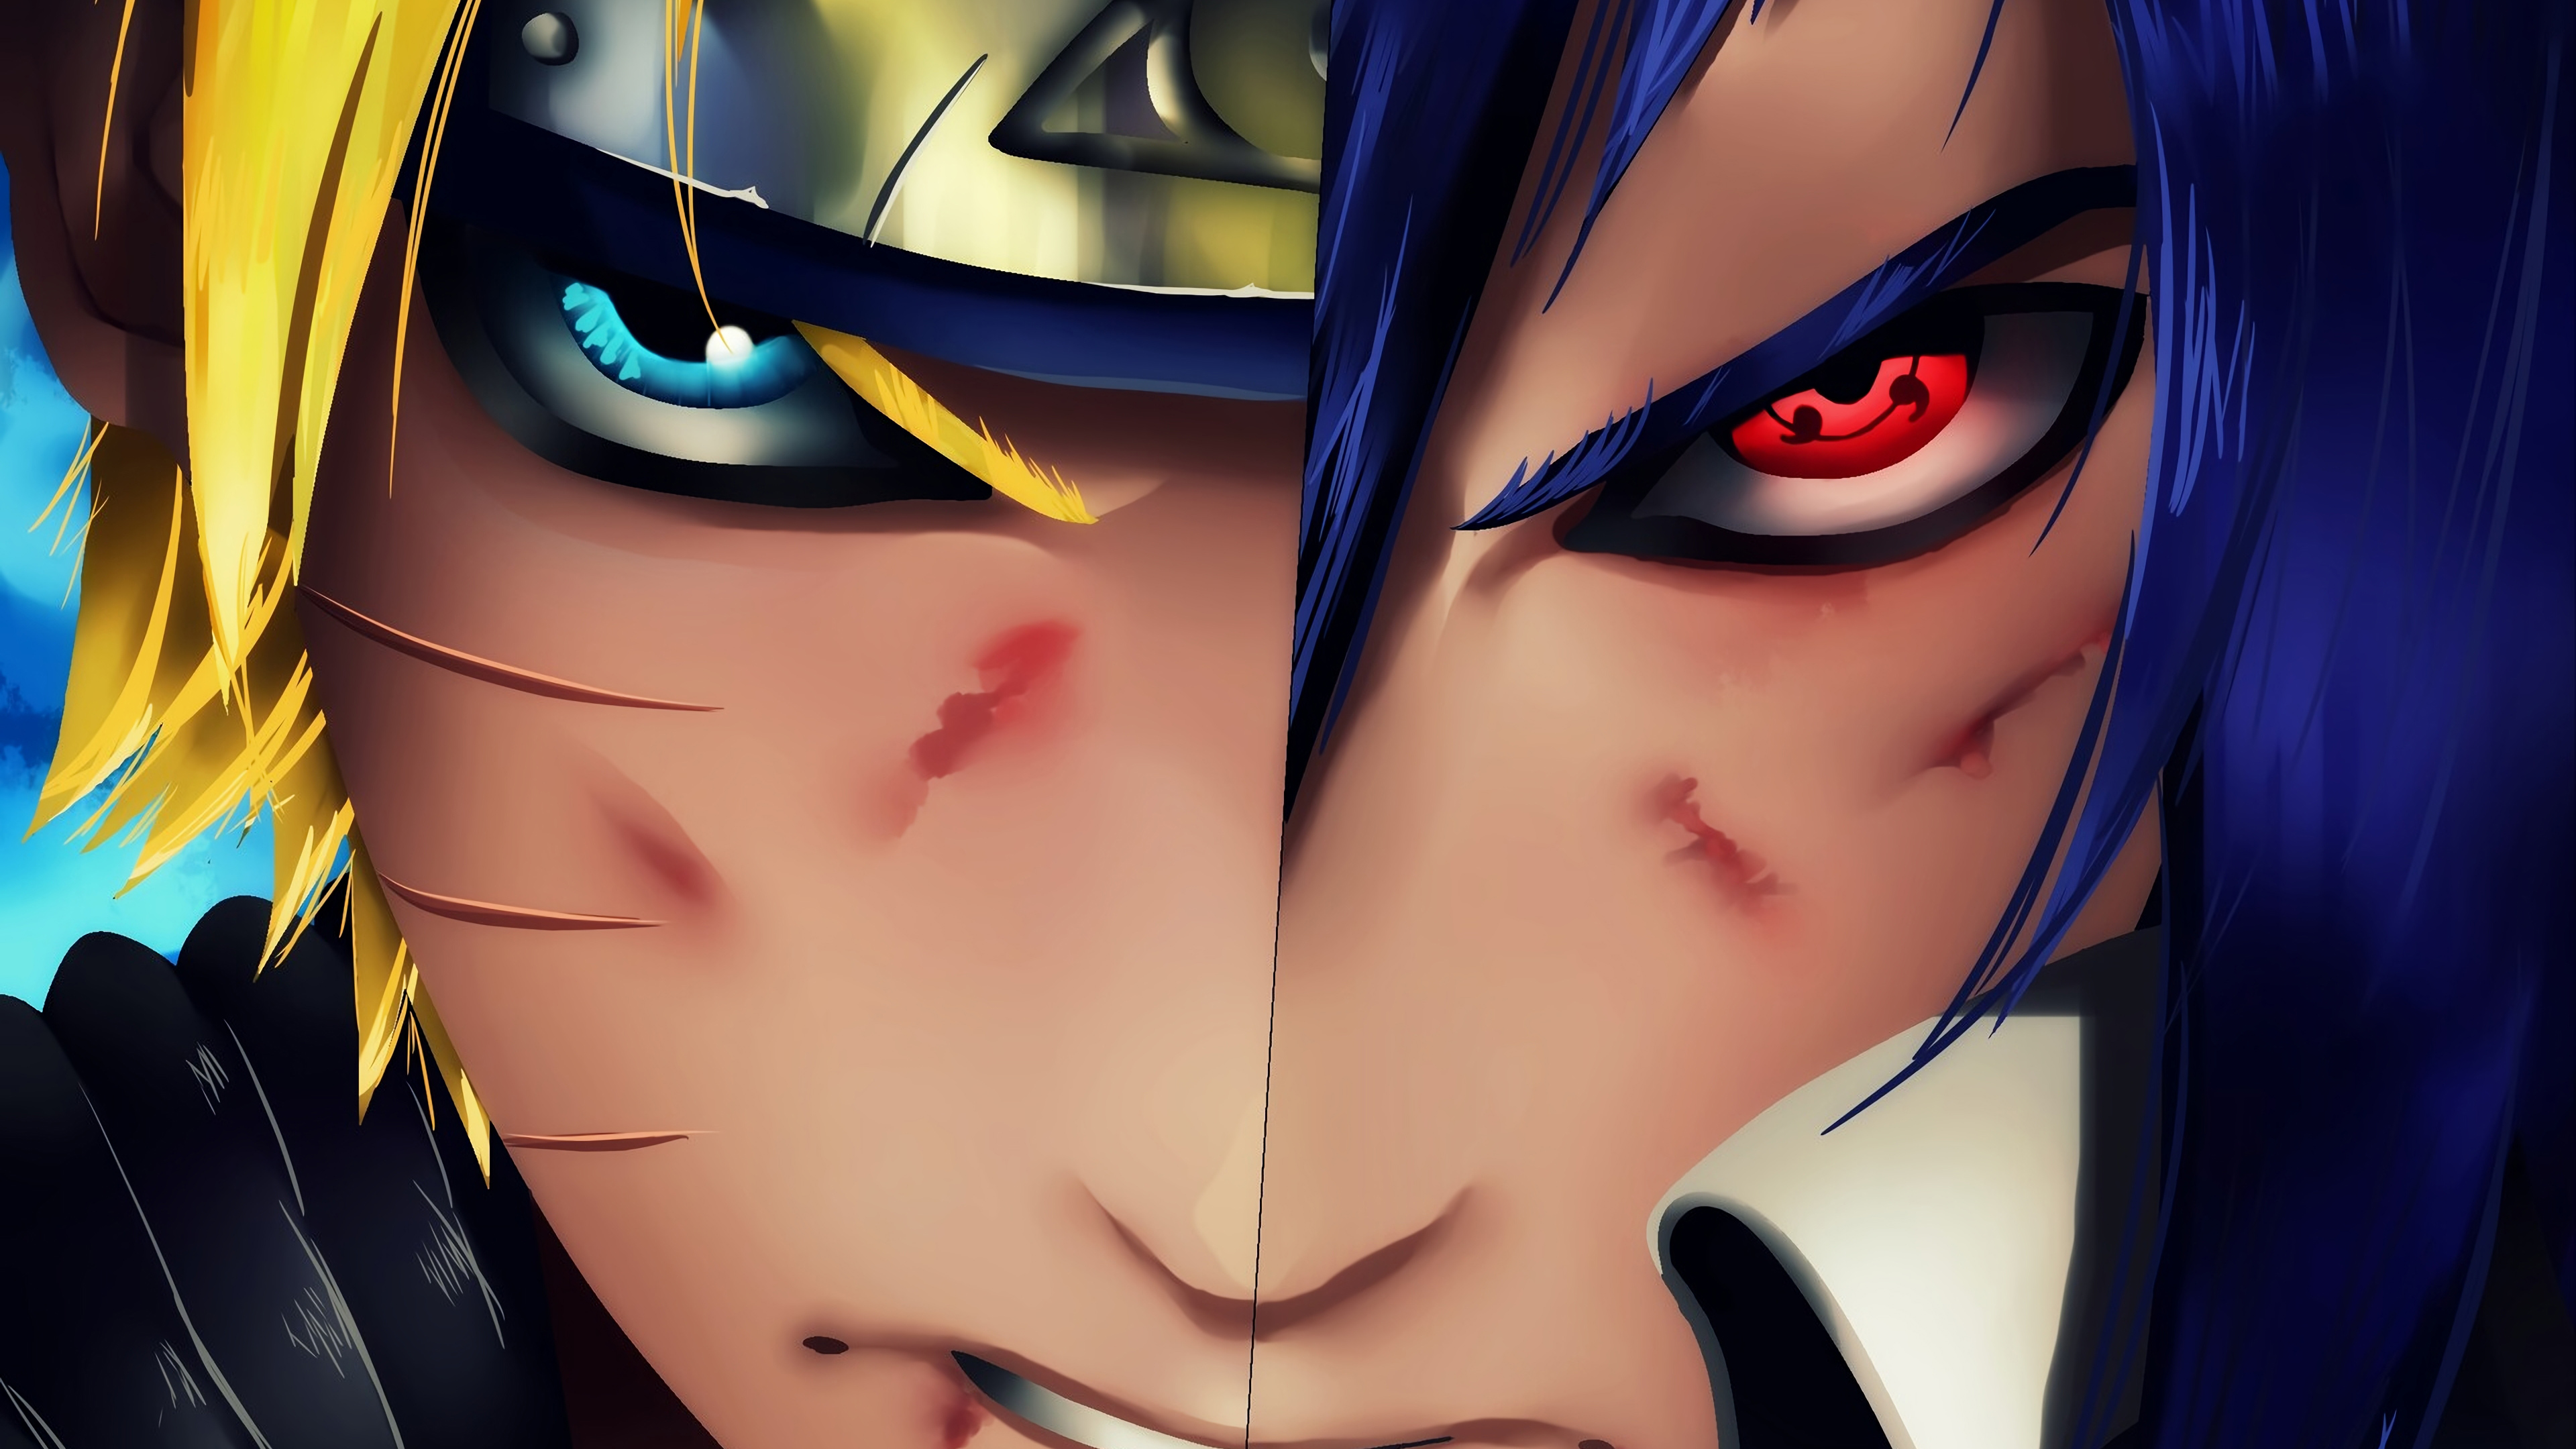 Naruto Vs Sasuke Hd Anime 4k Wallpapers Images Backgrounds Photos And Pictures See more sasuke wallpaper, naruto vs sasuke wallpaper, kakashi sasuke wallpaper, sasuke itachi wallpapers, sasuke akatsuki wallpaper looking for the best sasuke wallpaper? naruto vs sasuke hd anime 4k